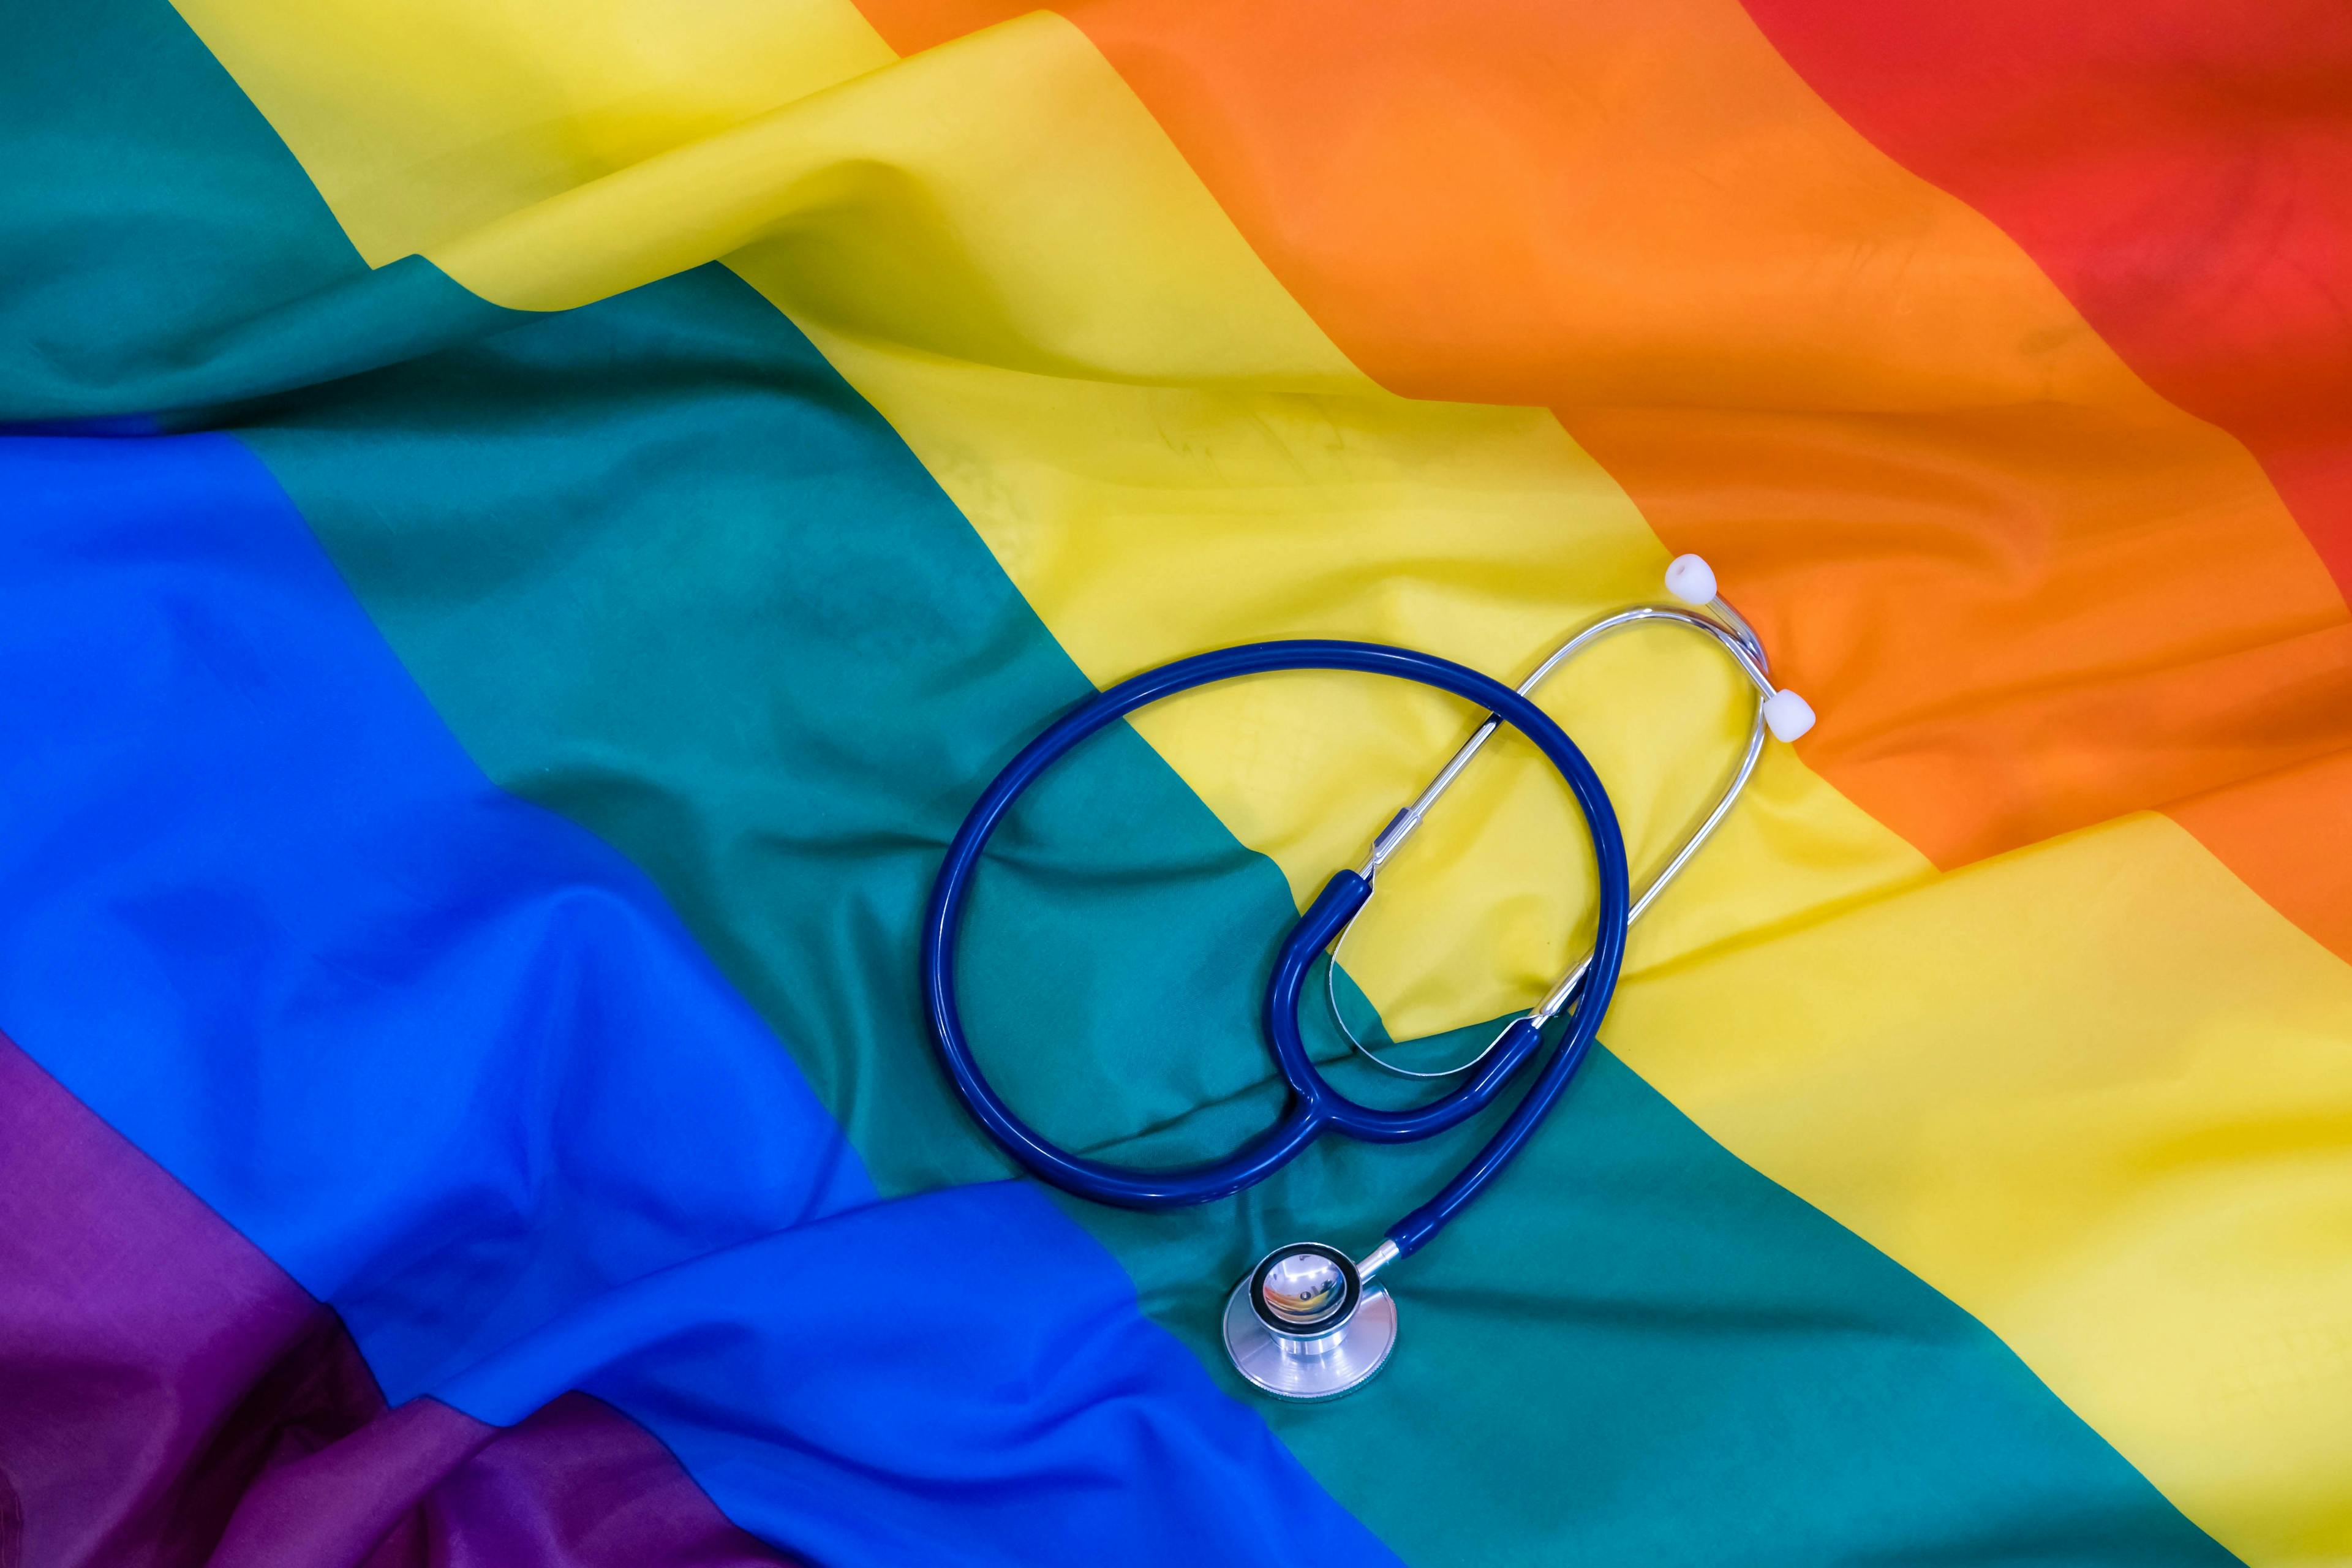 Physicians oppose rollback of LGBTQ discrimination laws